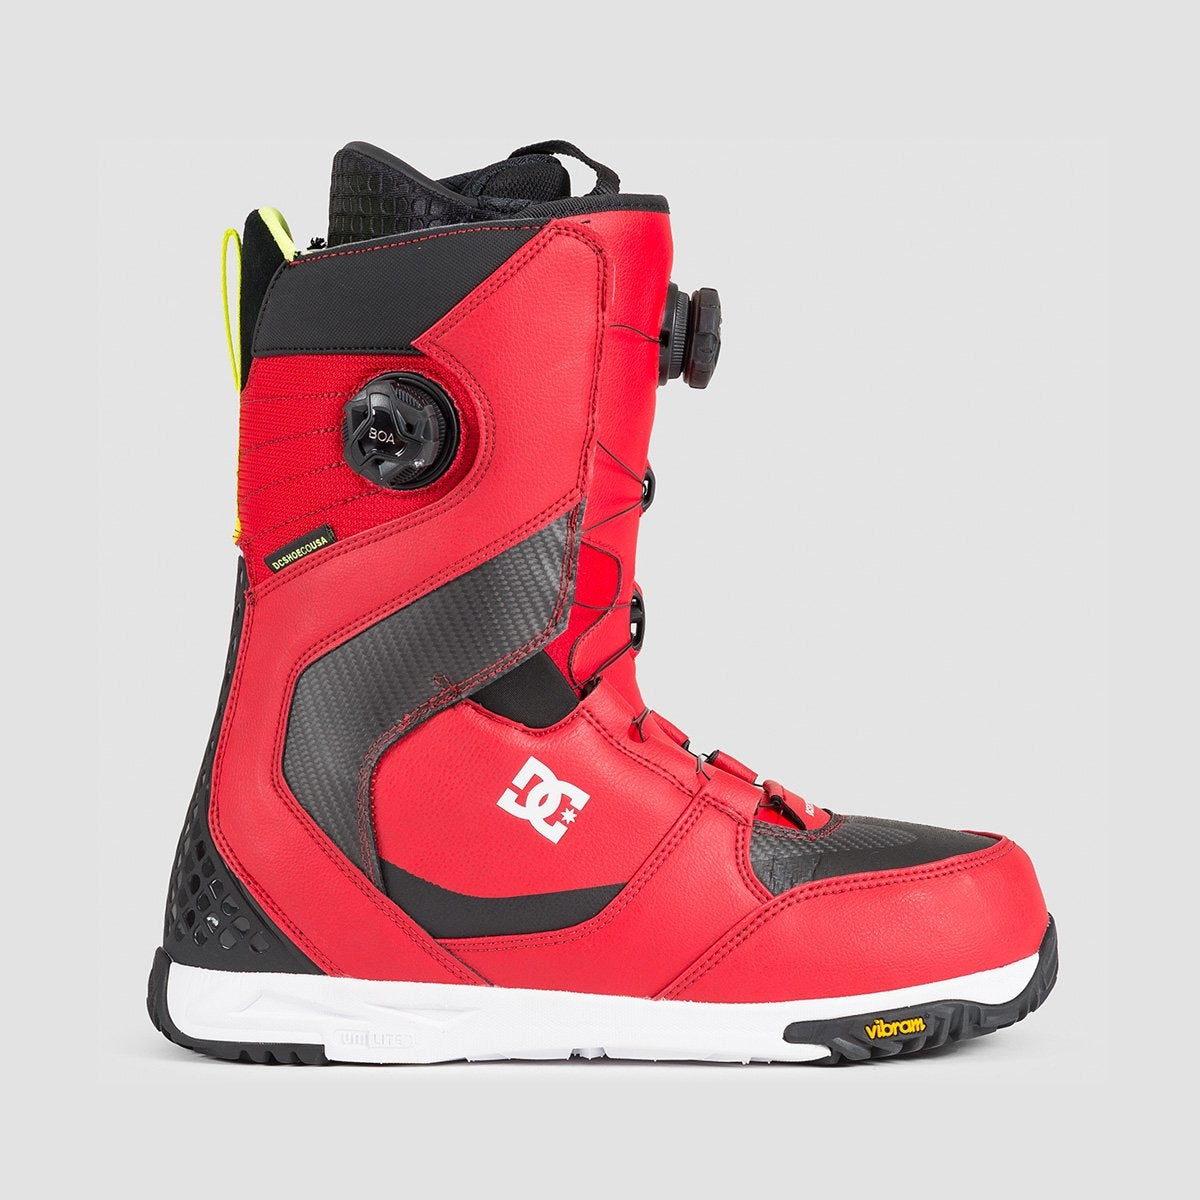 Snowboard Boots at Rollersnakes.co.uk